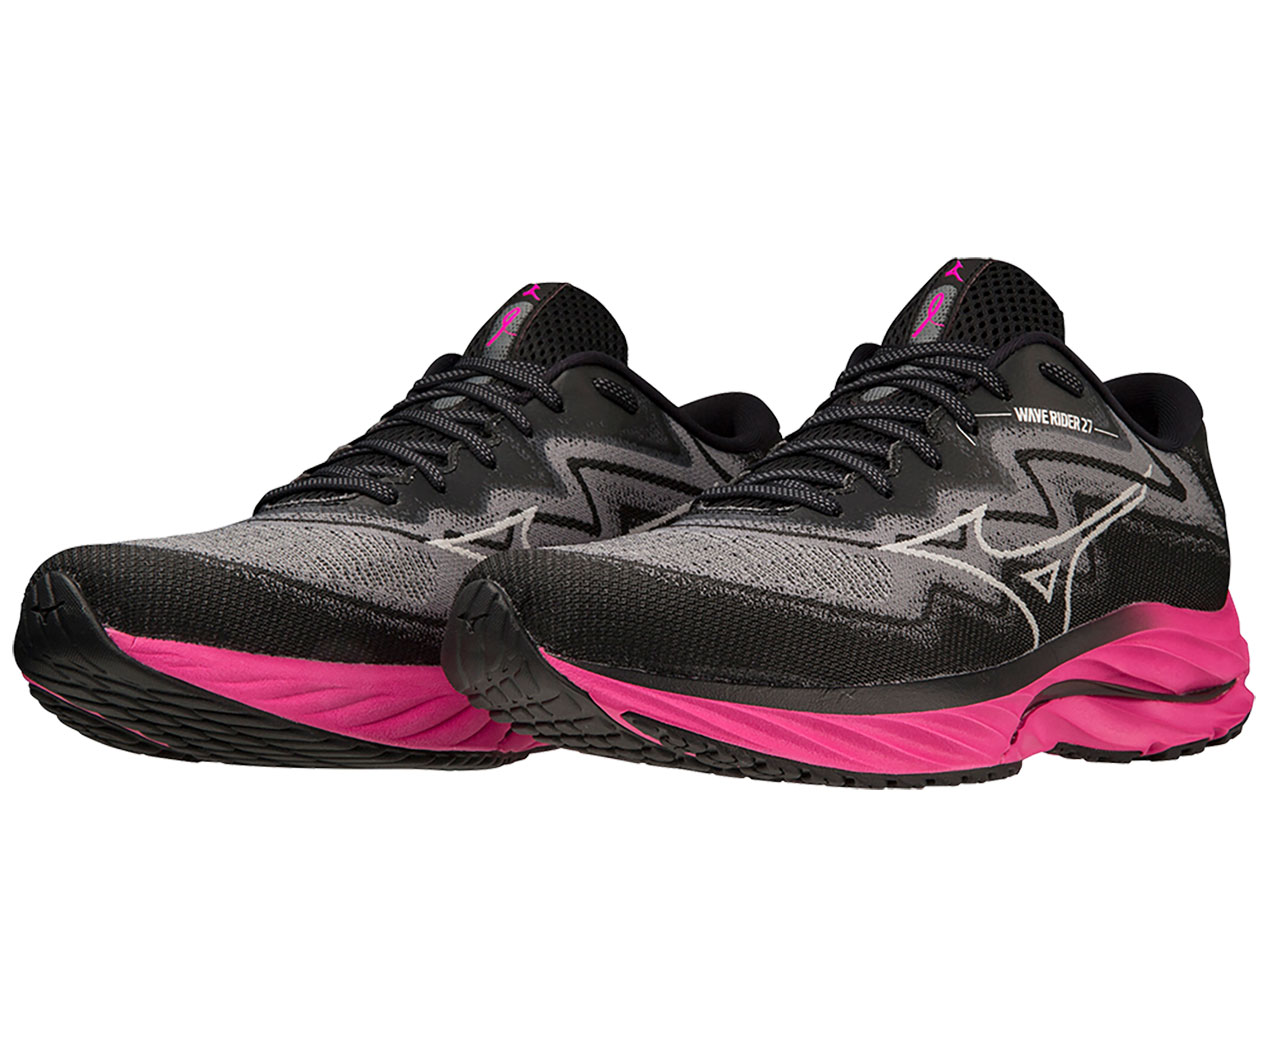 Project Zero Wave Rider 27 Men's Running Shoe | Breast Cancer Research  Foundation